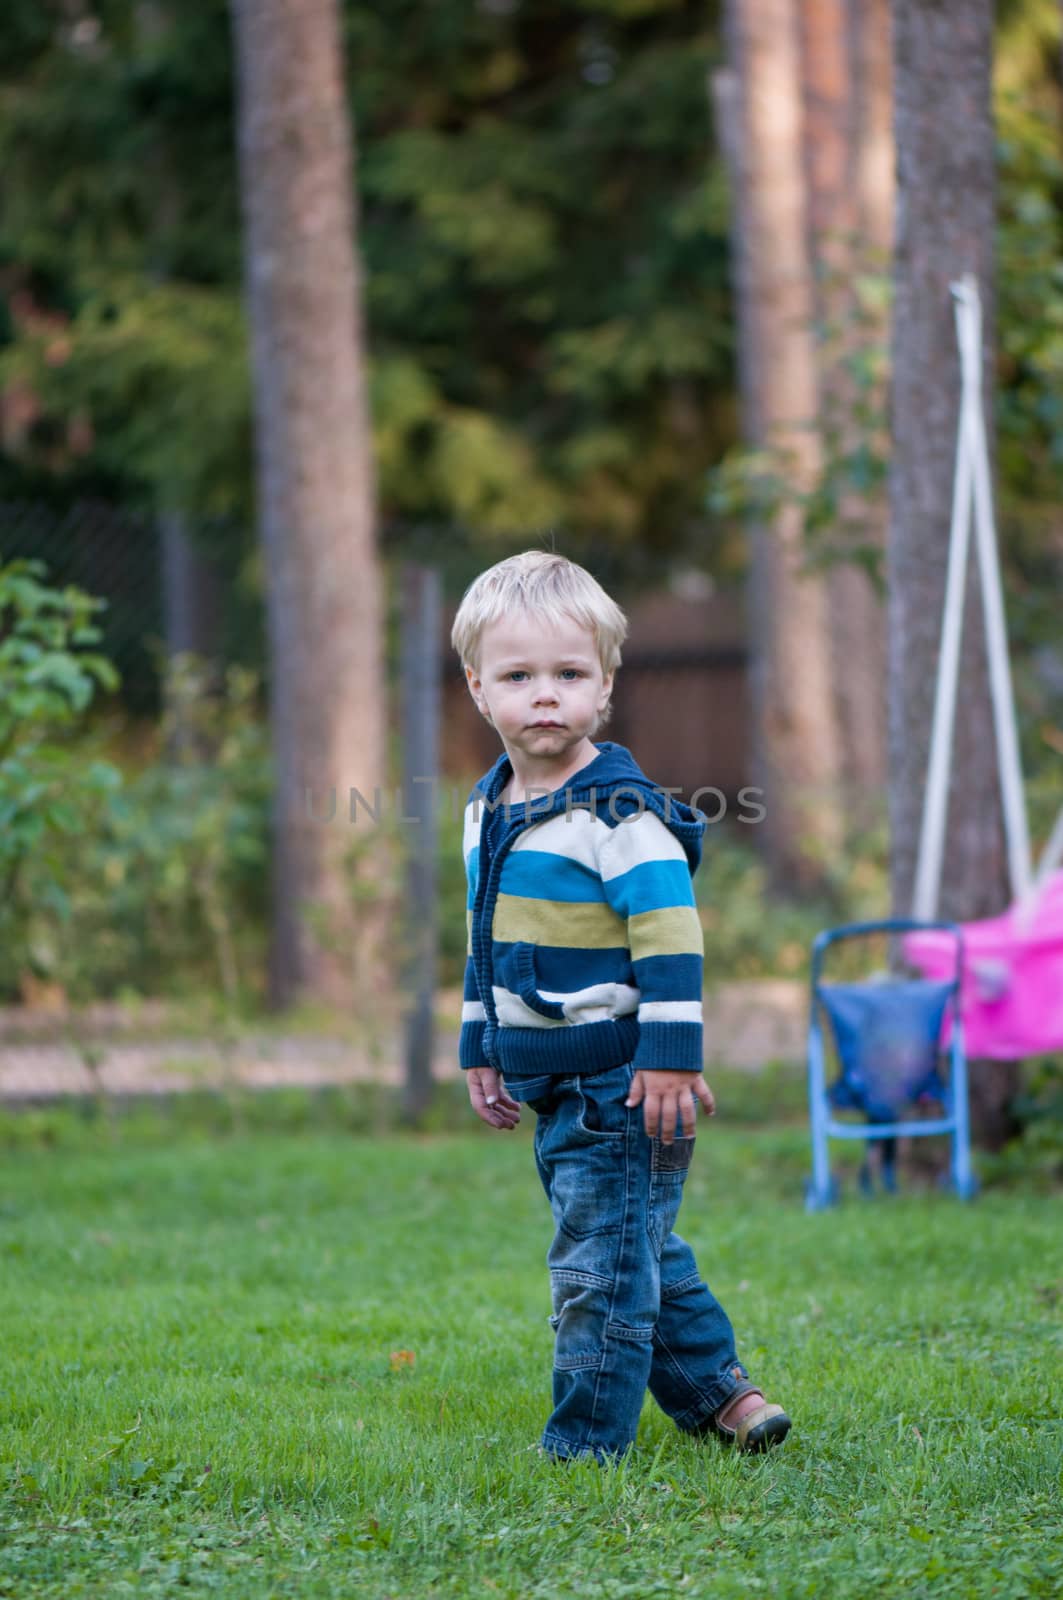 Cute baby in park by anytka